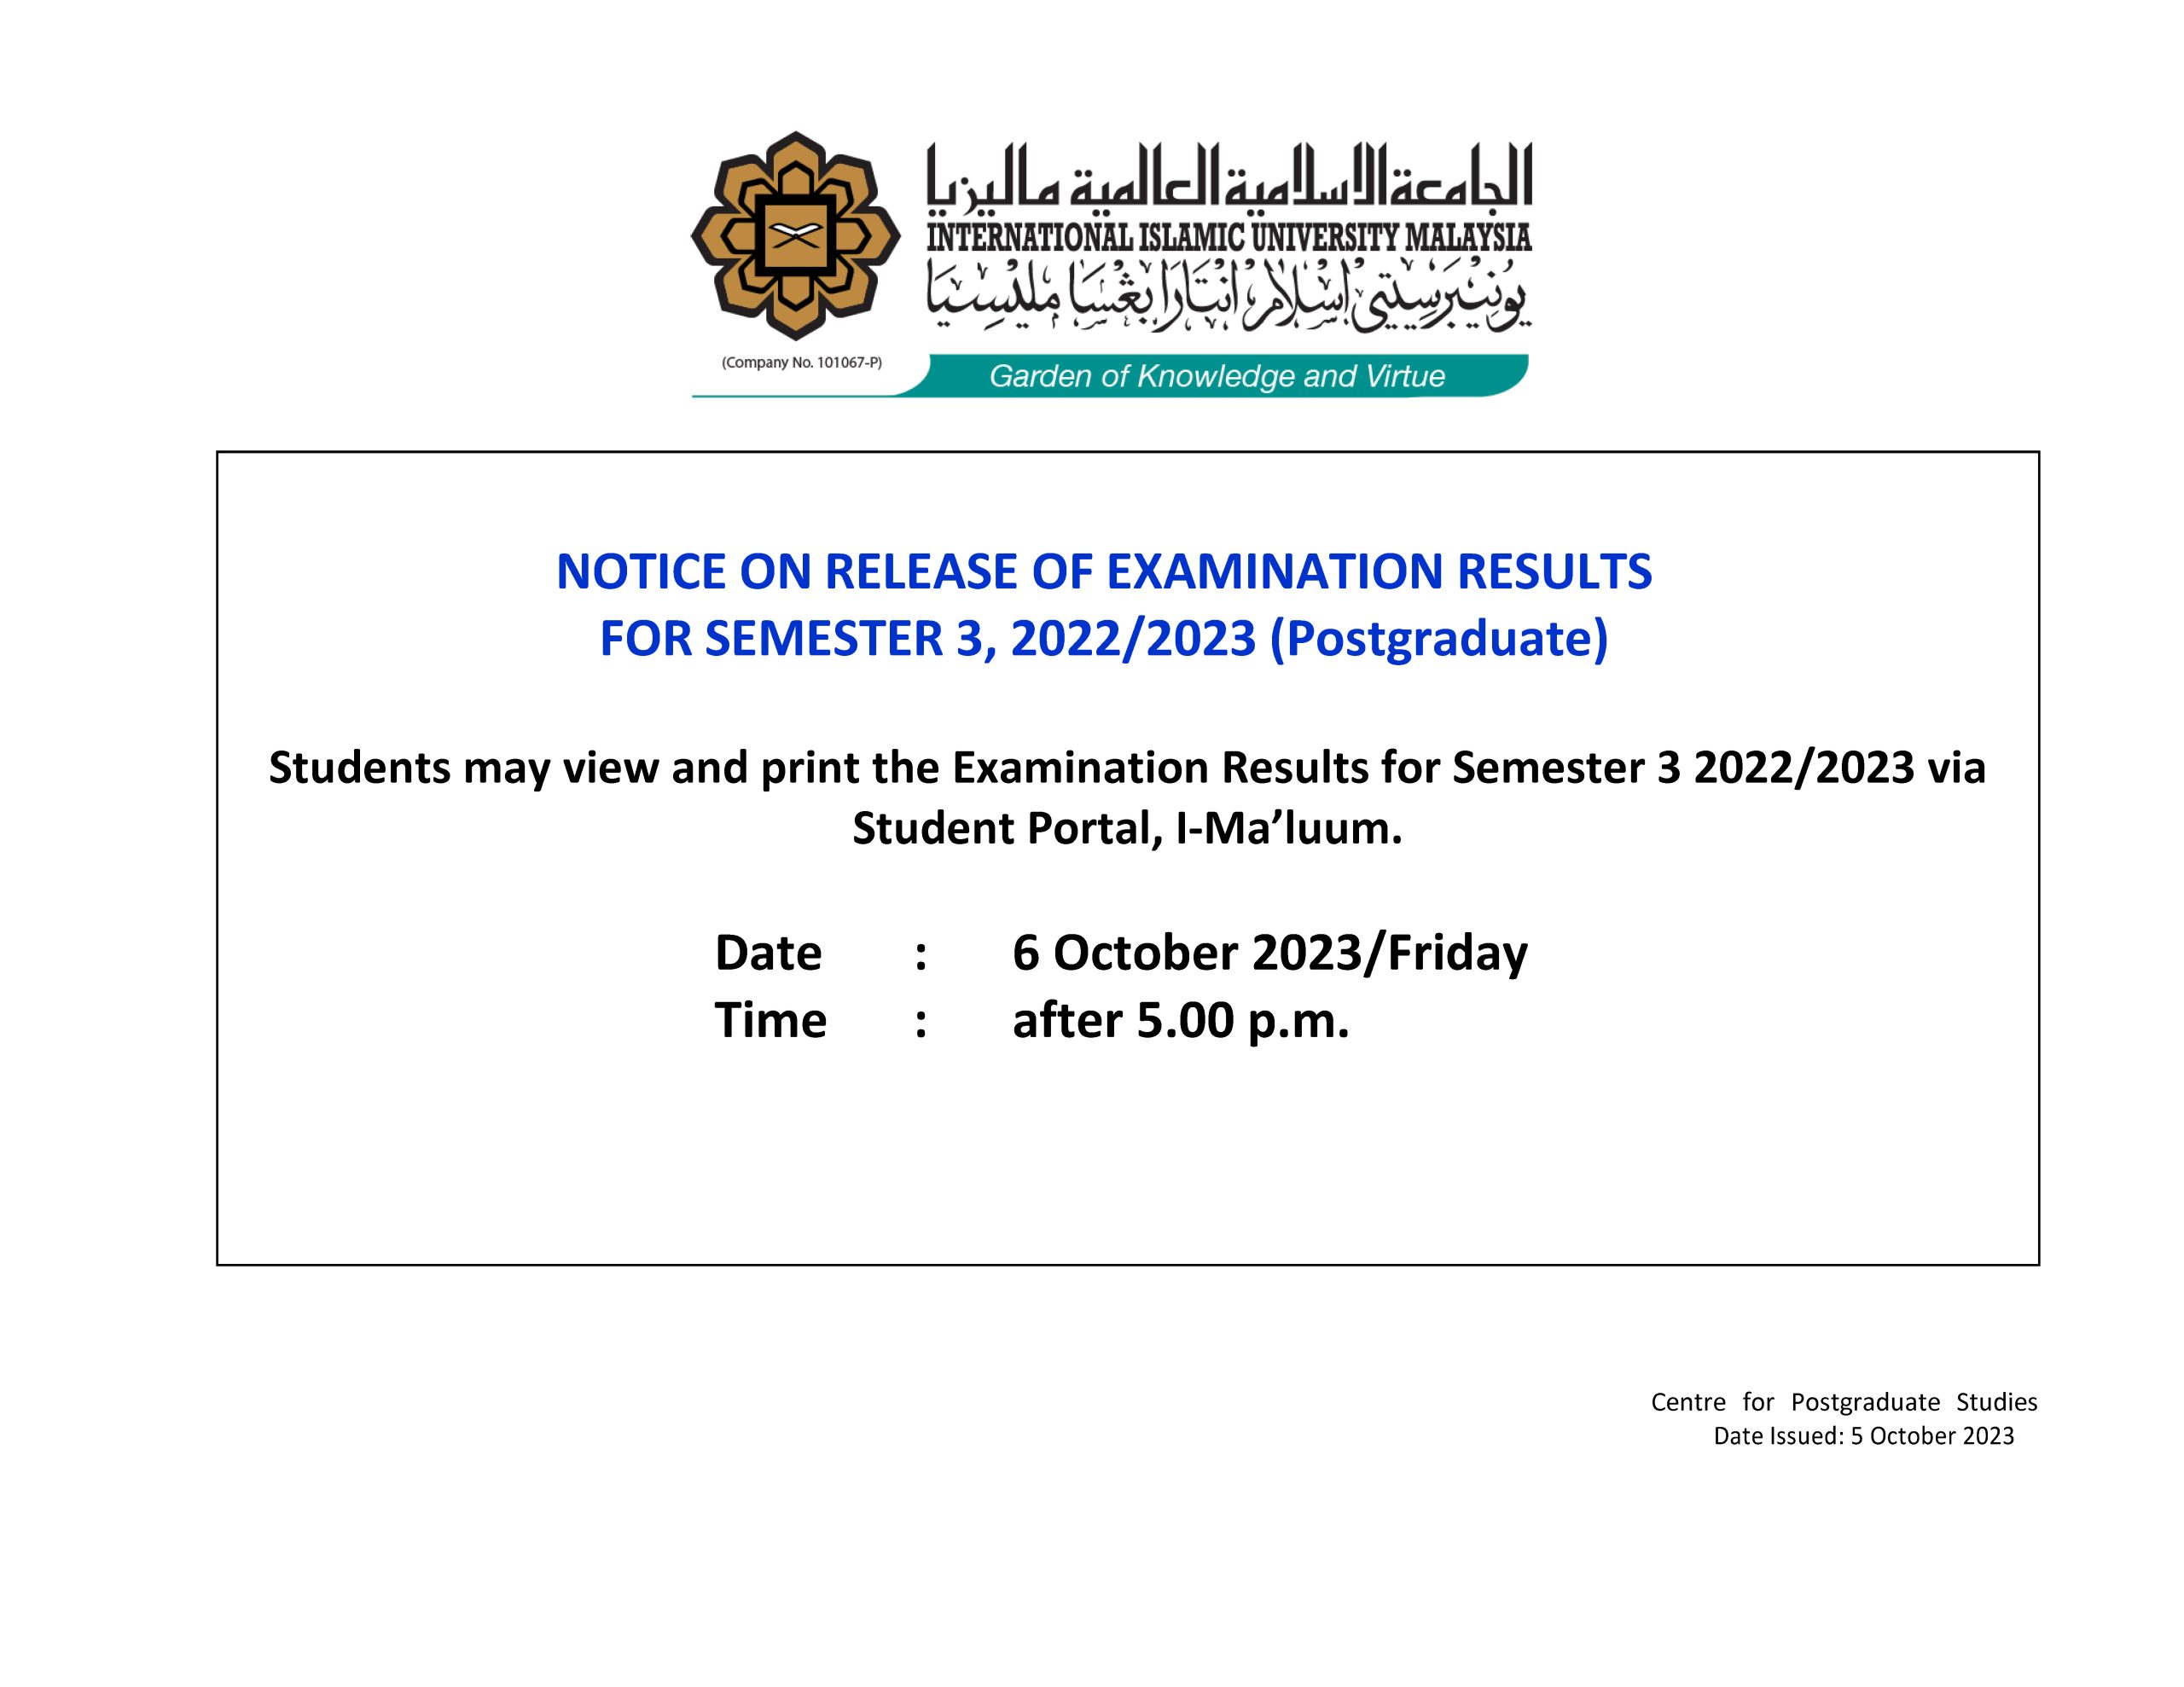 Notice on Release of Examination Results for Semester 1, 2023/2024 (Postgraduate)